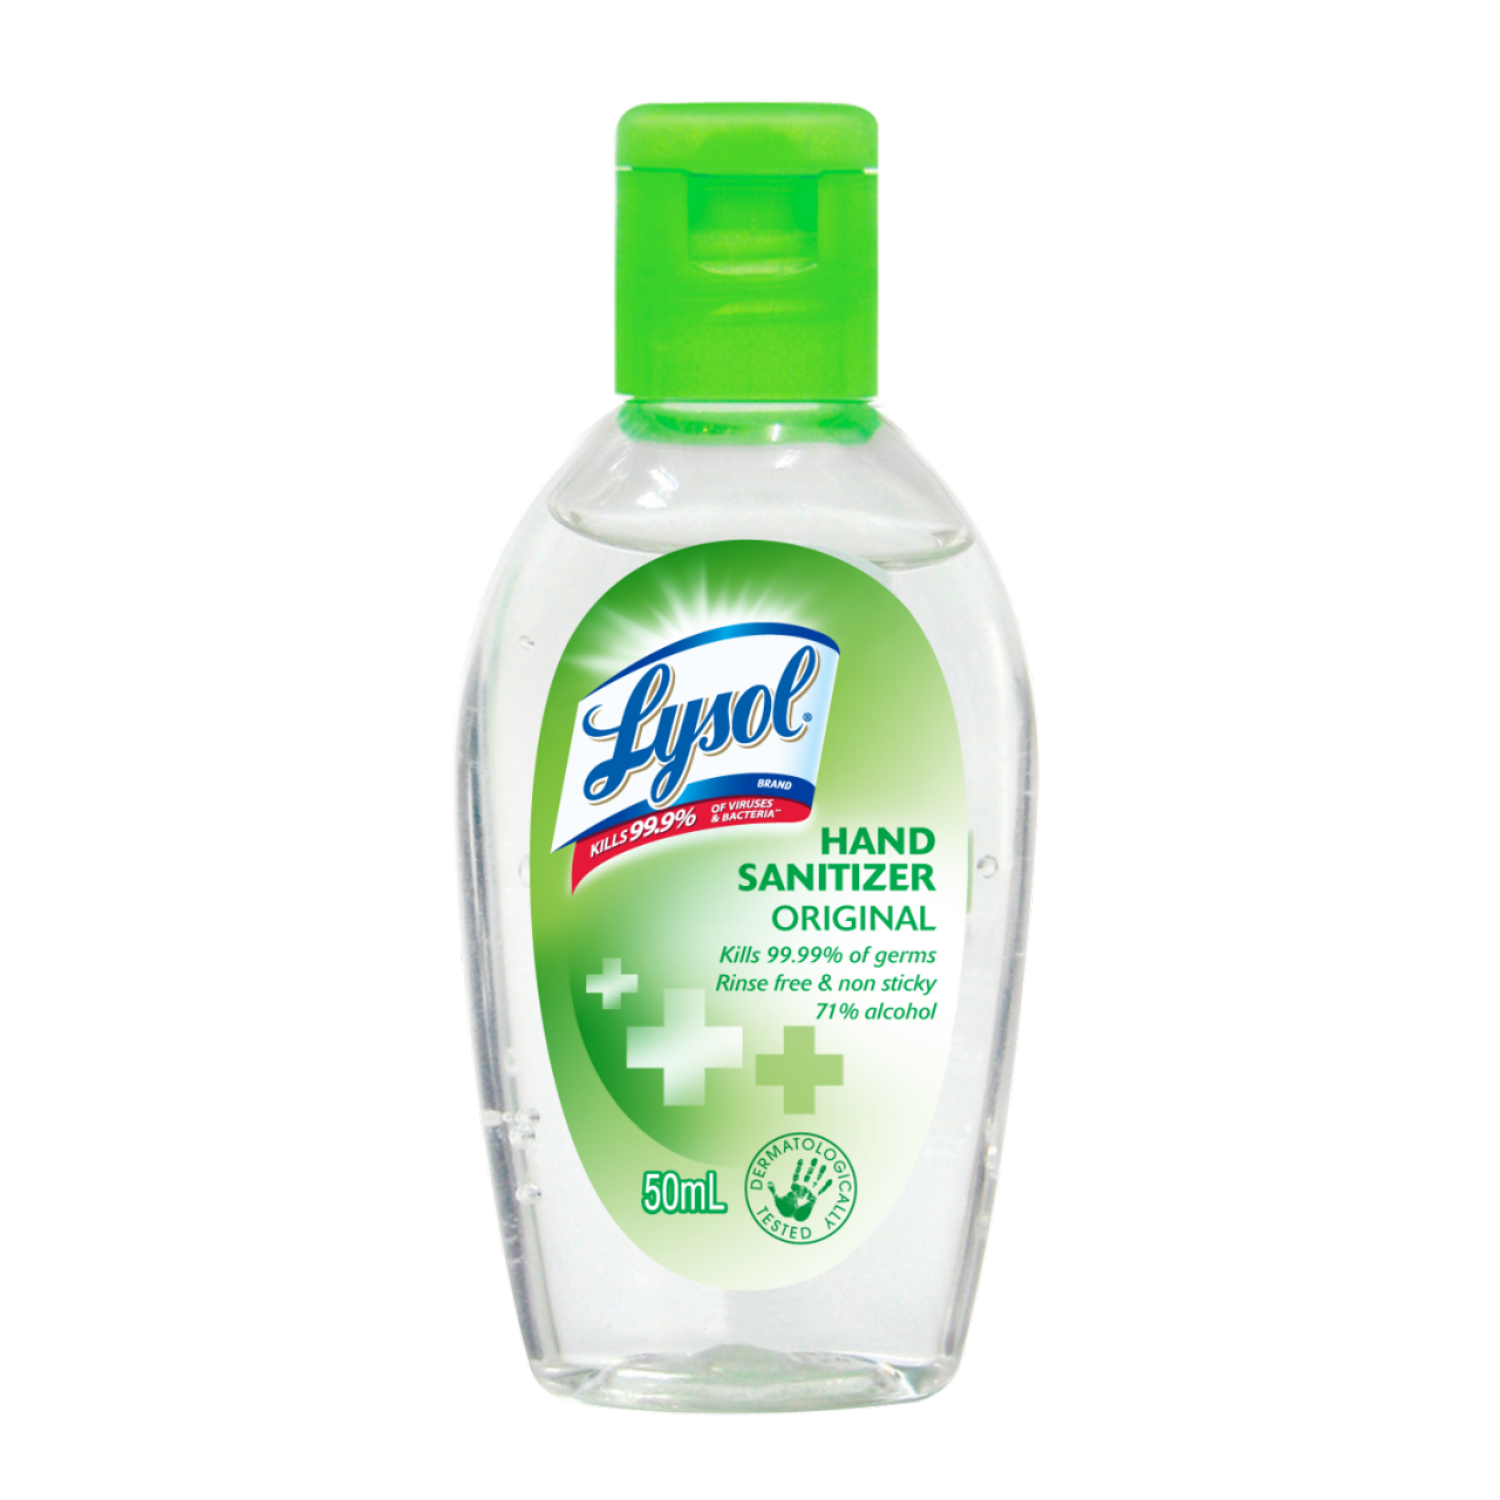 List of Mildly Scented Alcohol and Hand Sanitizers in the Philippines